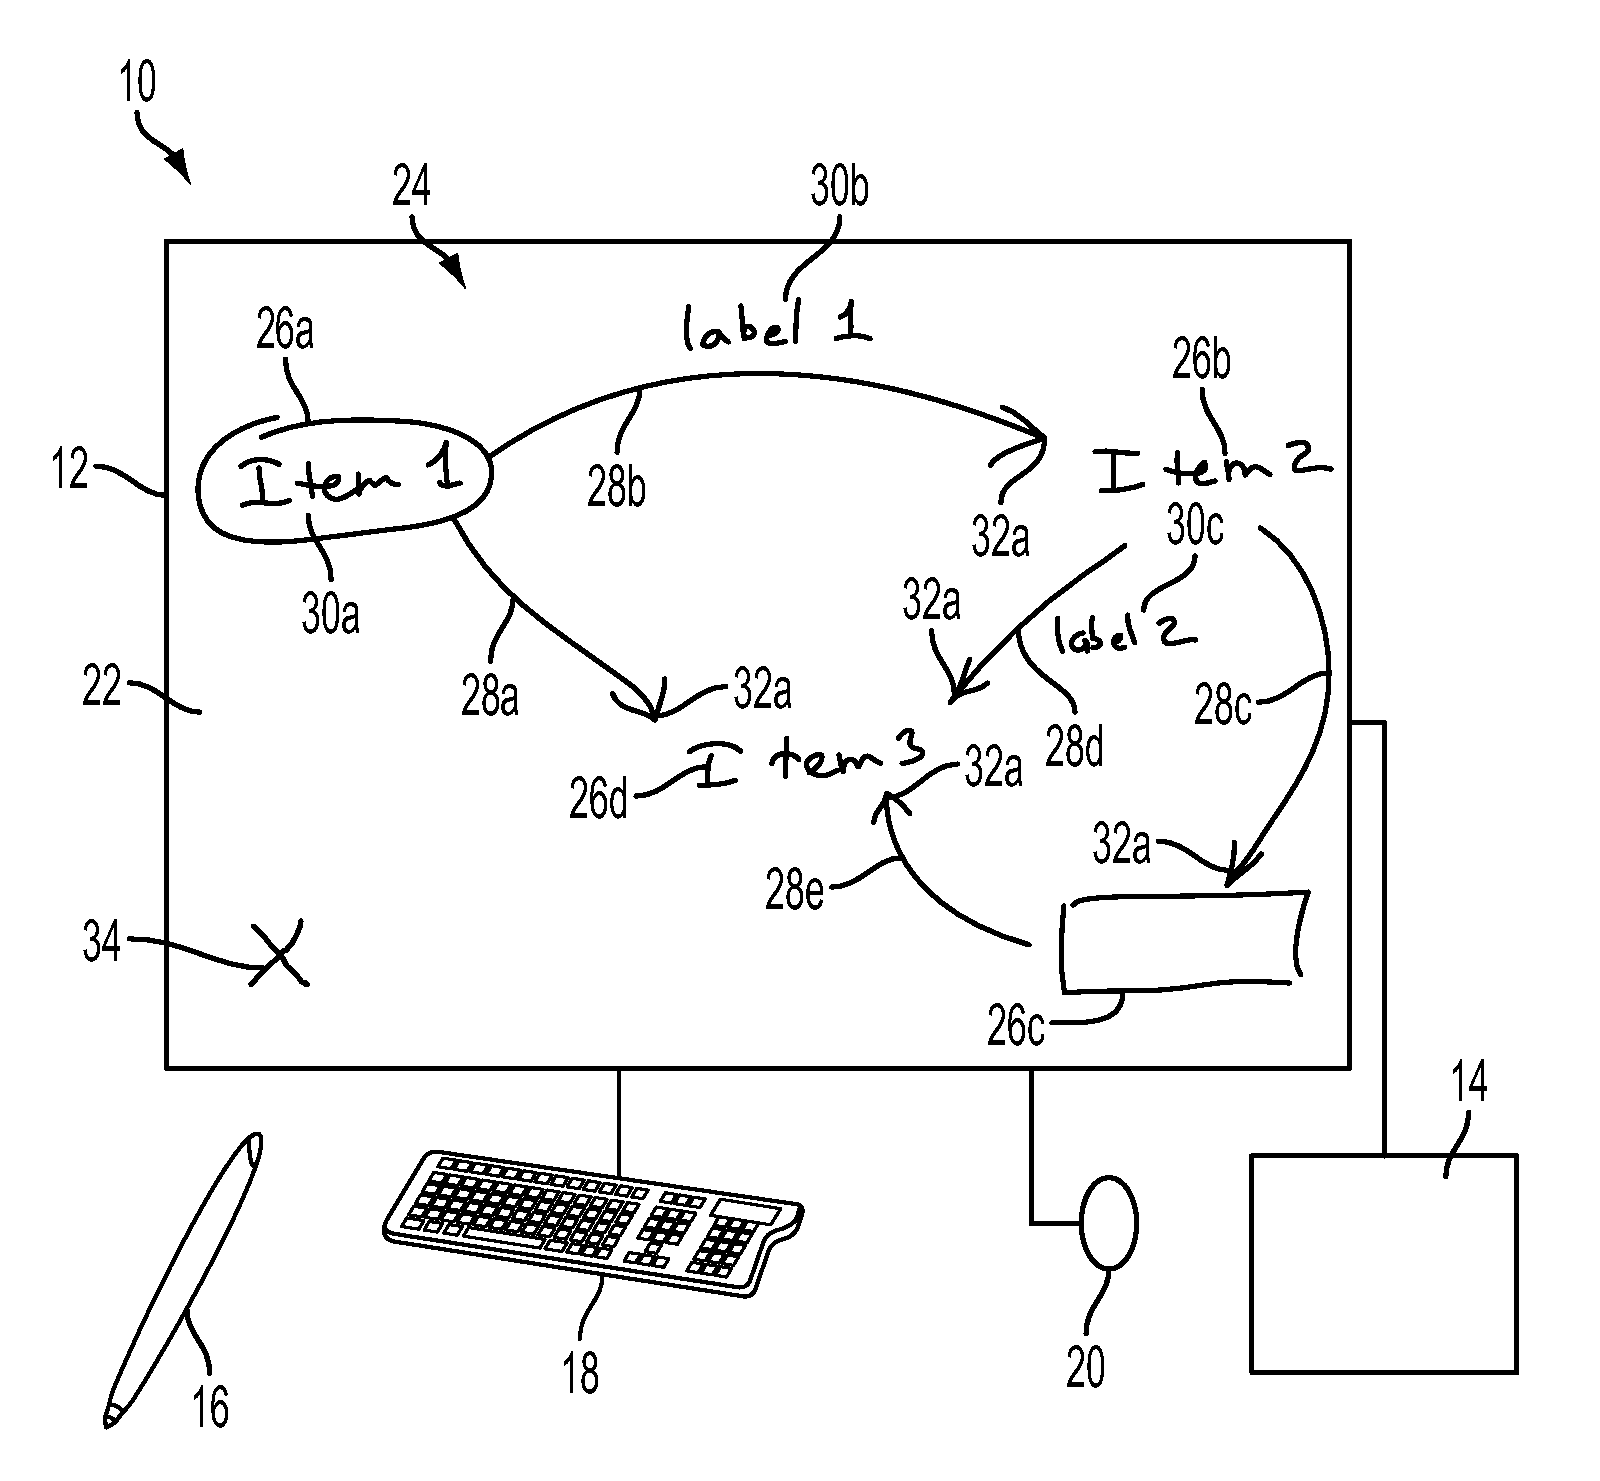 Methods and processes for recognition of electronic ink strokes